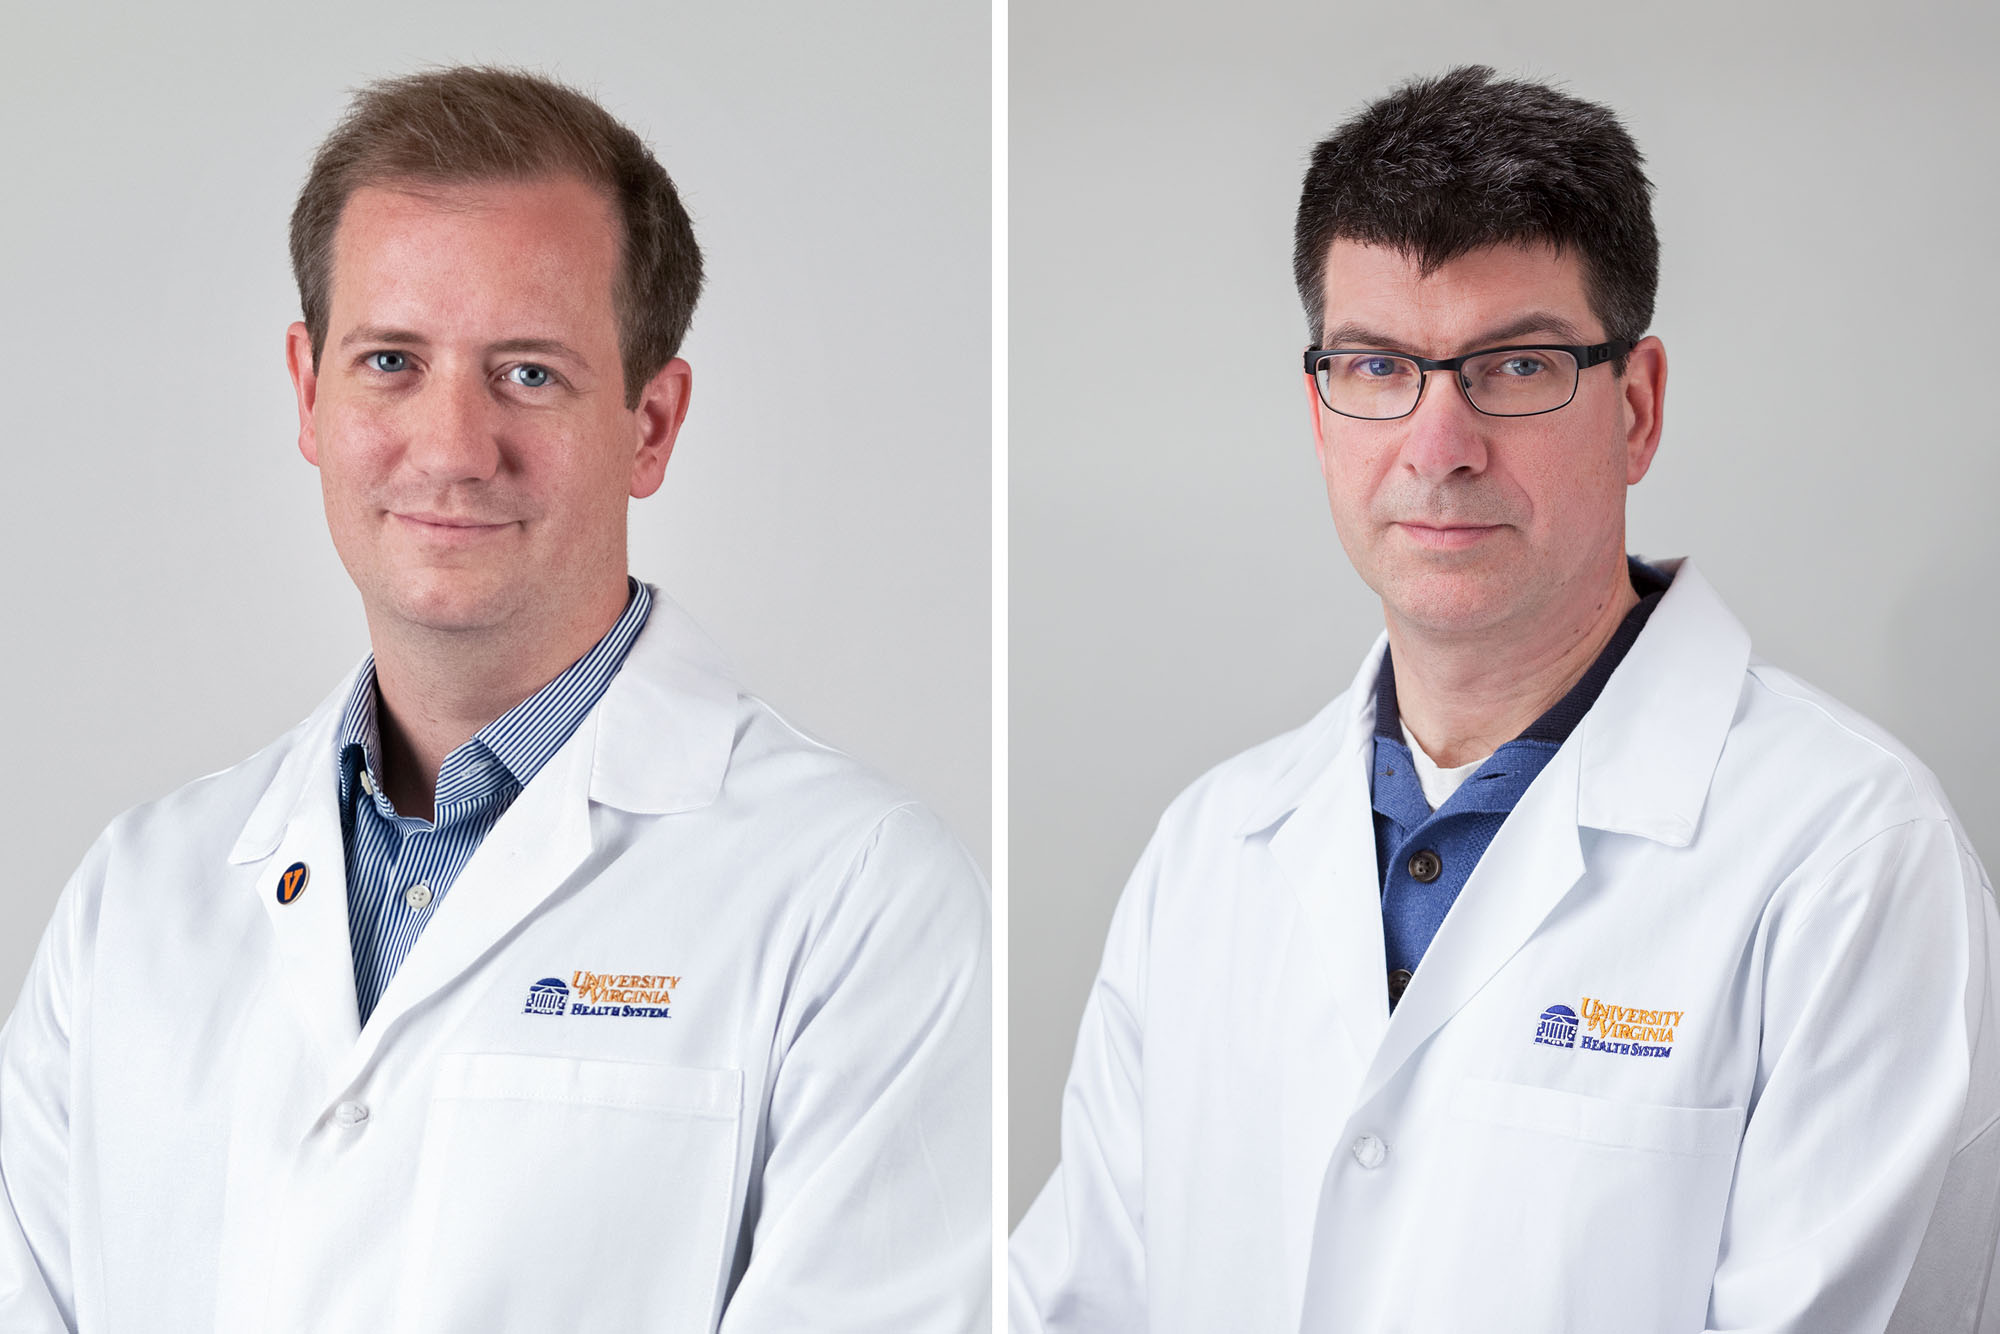 Headshots: Dr. Andrew Schomer, left, and Dr. Mark Quigg, right